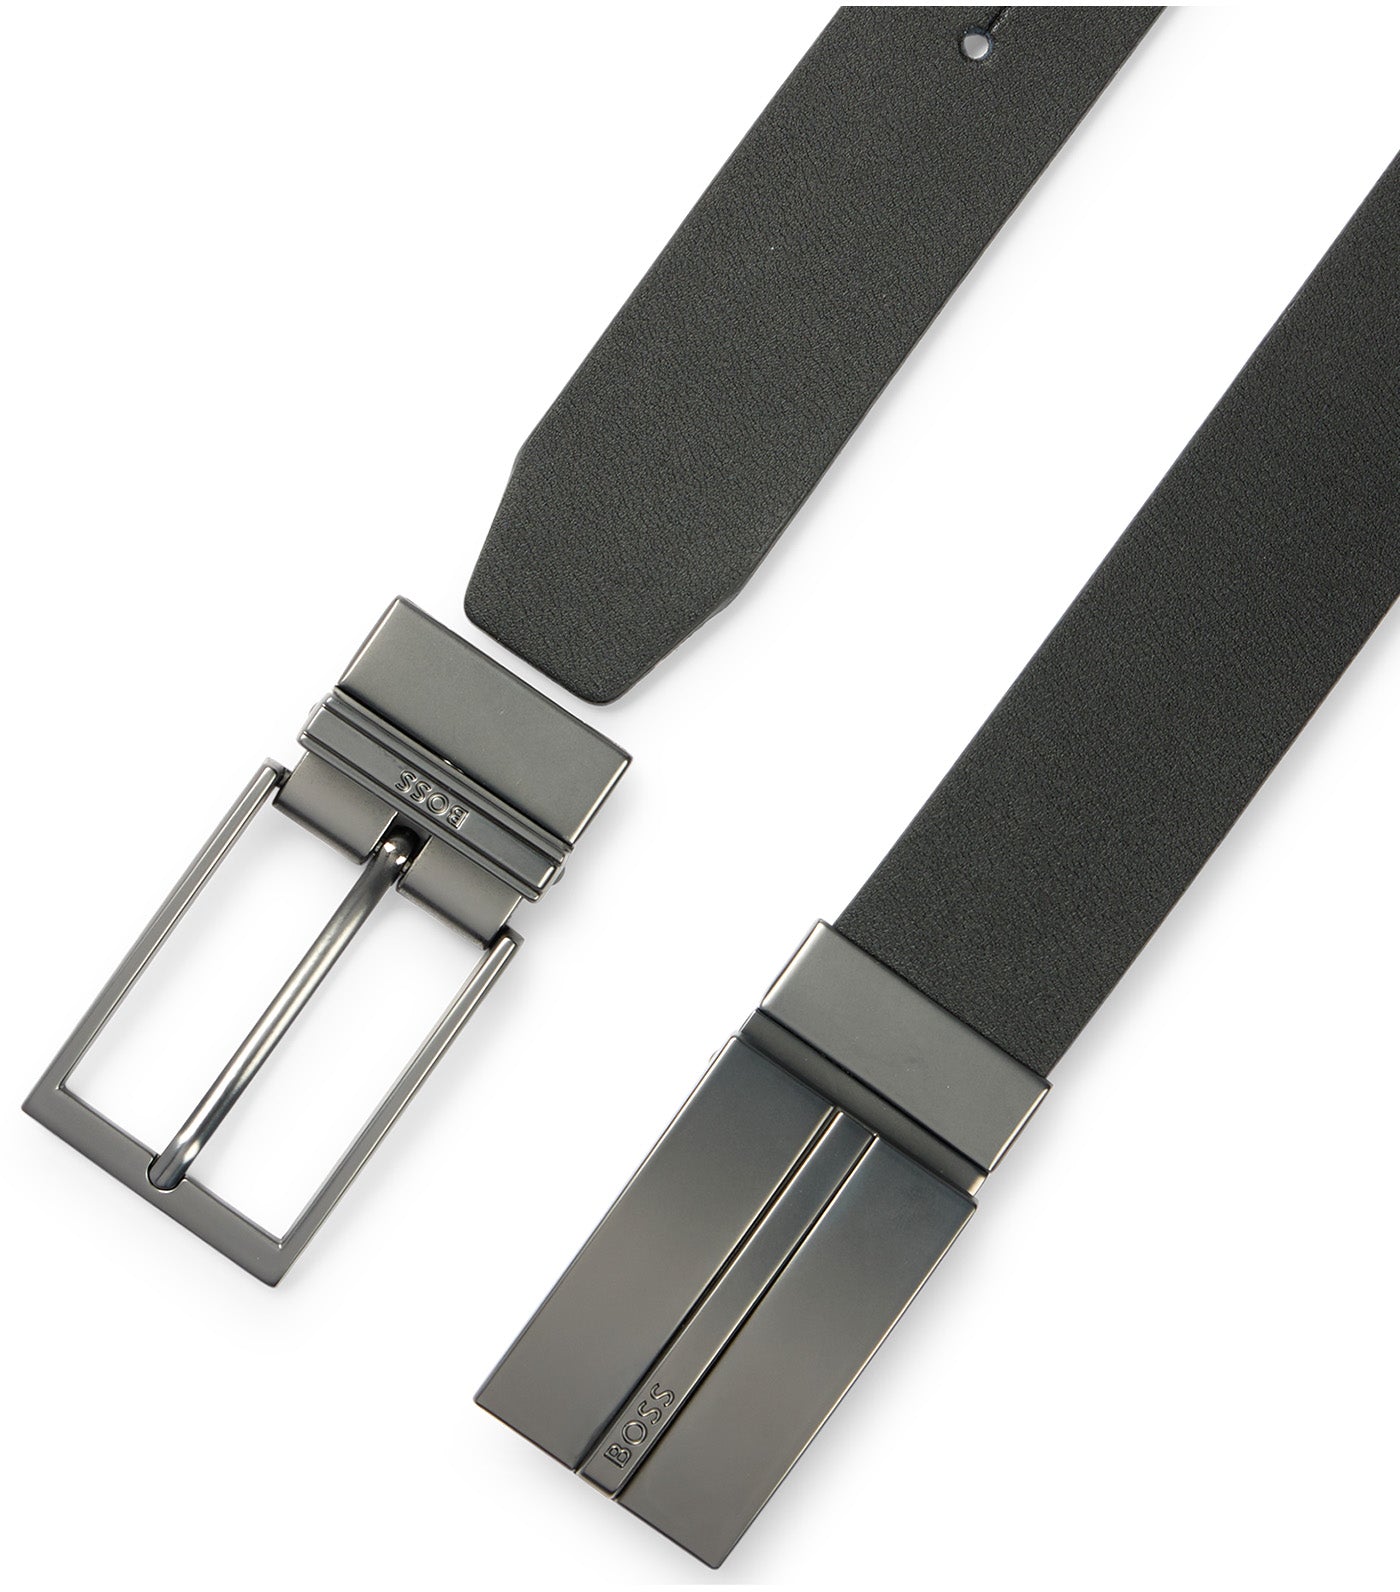 Italian-Leather Reversible Belt with Pin and Plaque Buckle